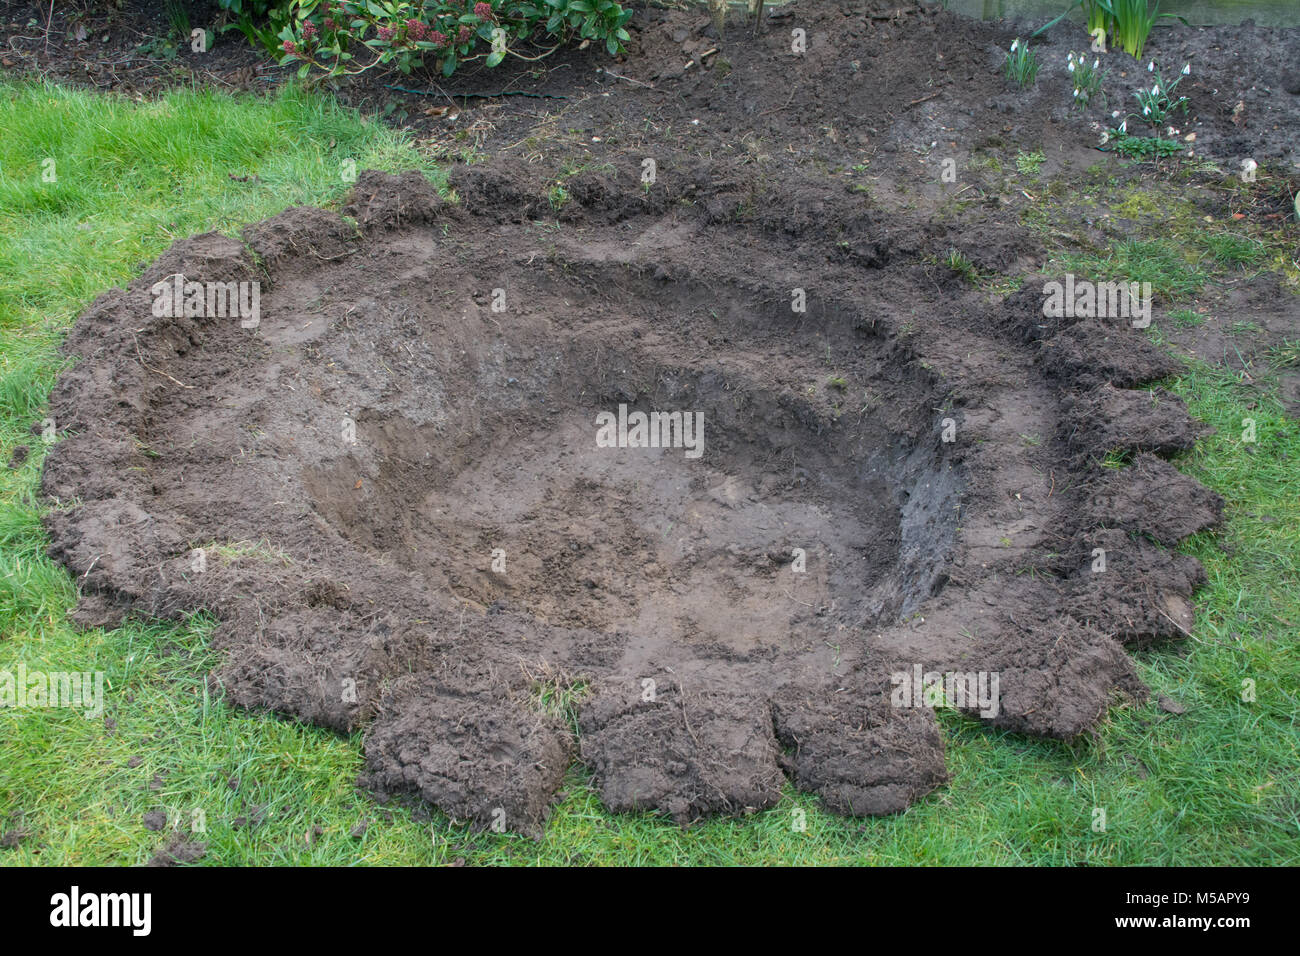 Creating and preparing a garden pond for wildlife. Step 1 of 4. Stock Photo